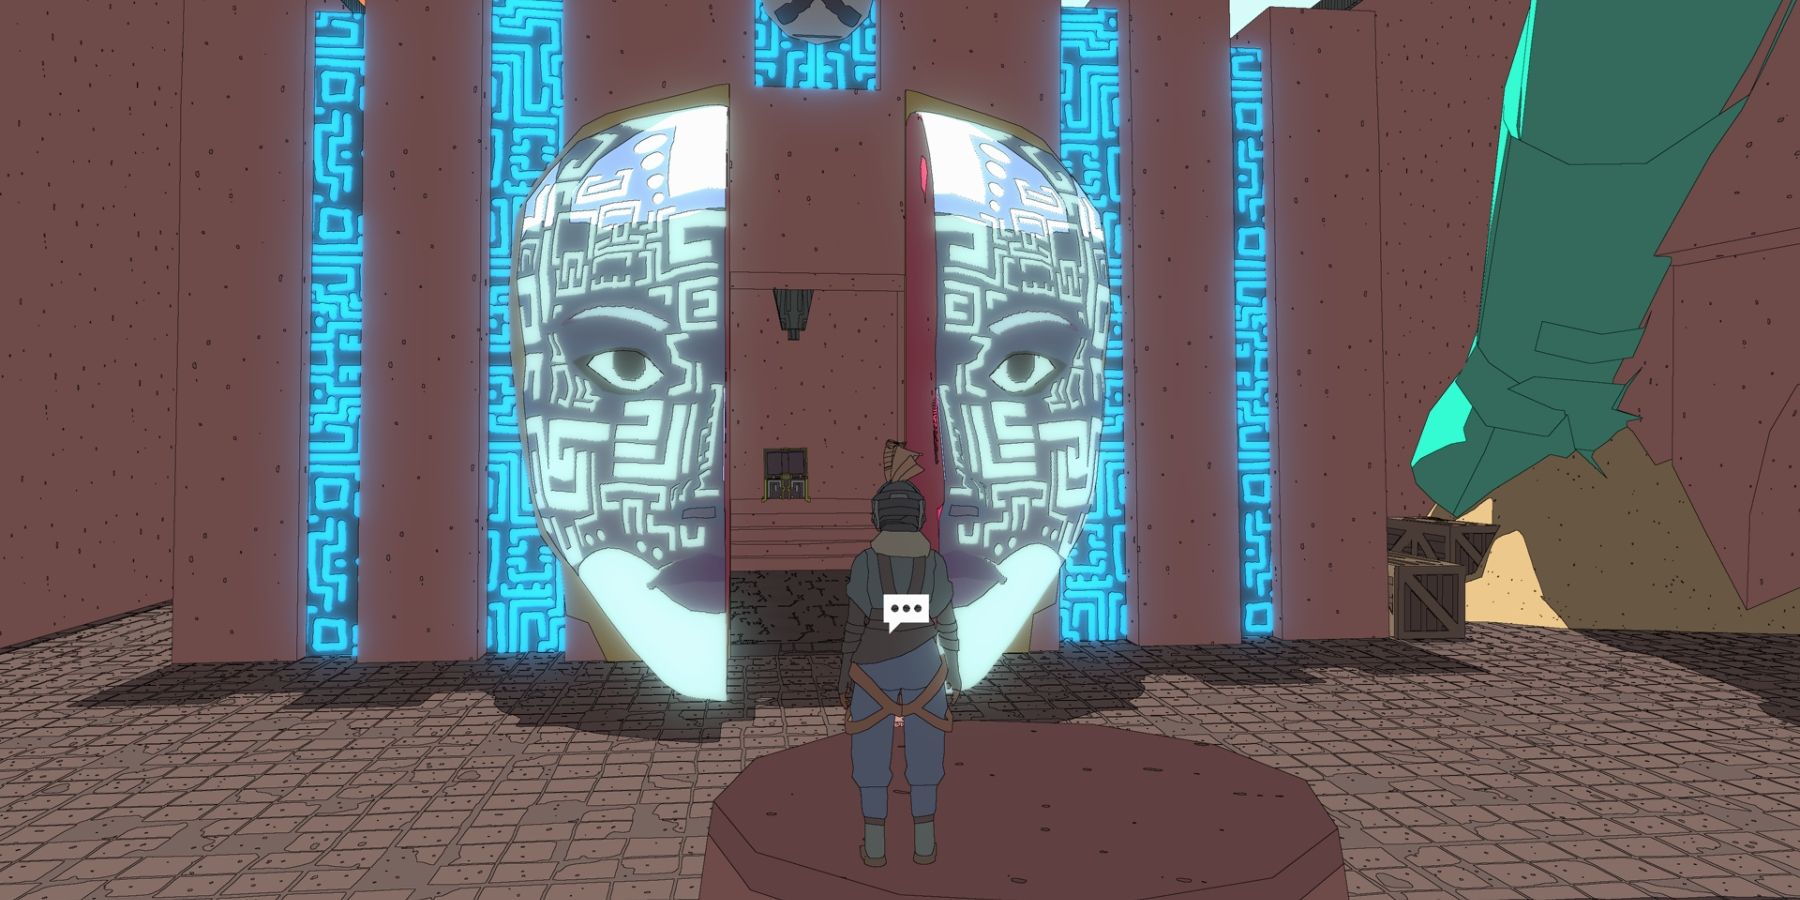 Sable standing in front of open, glowing door that is two halves of a face